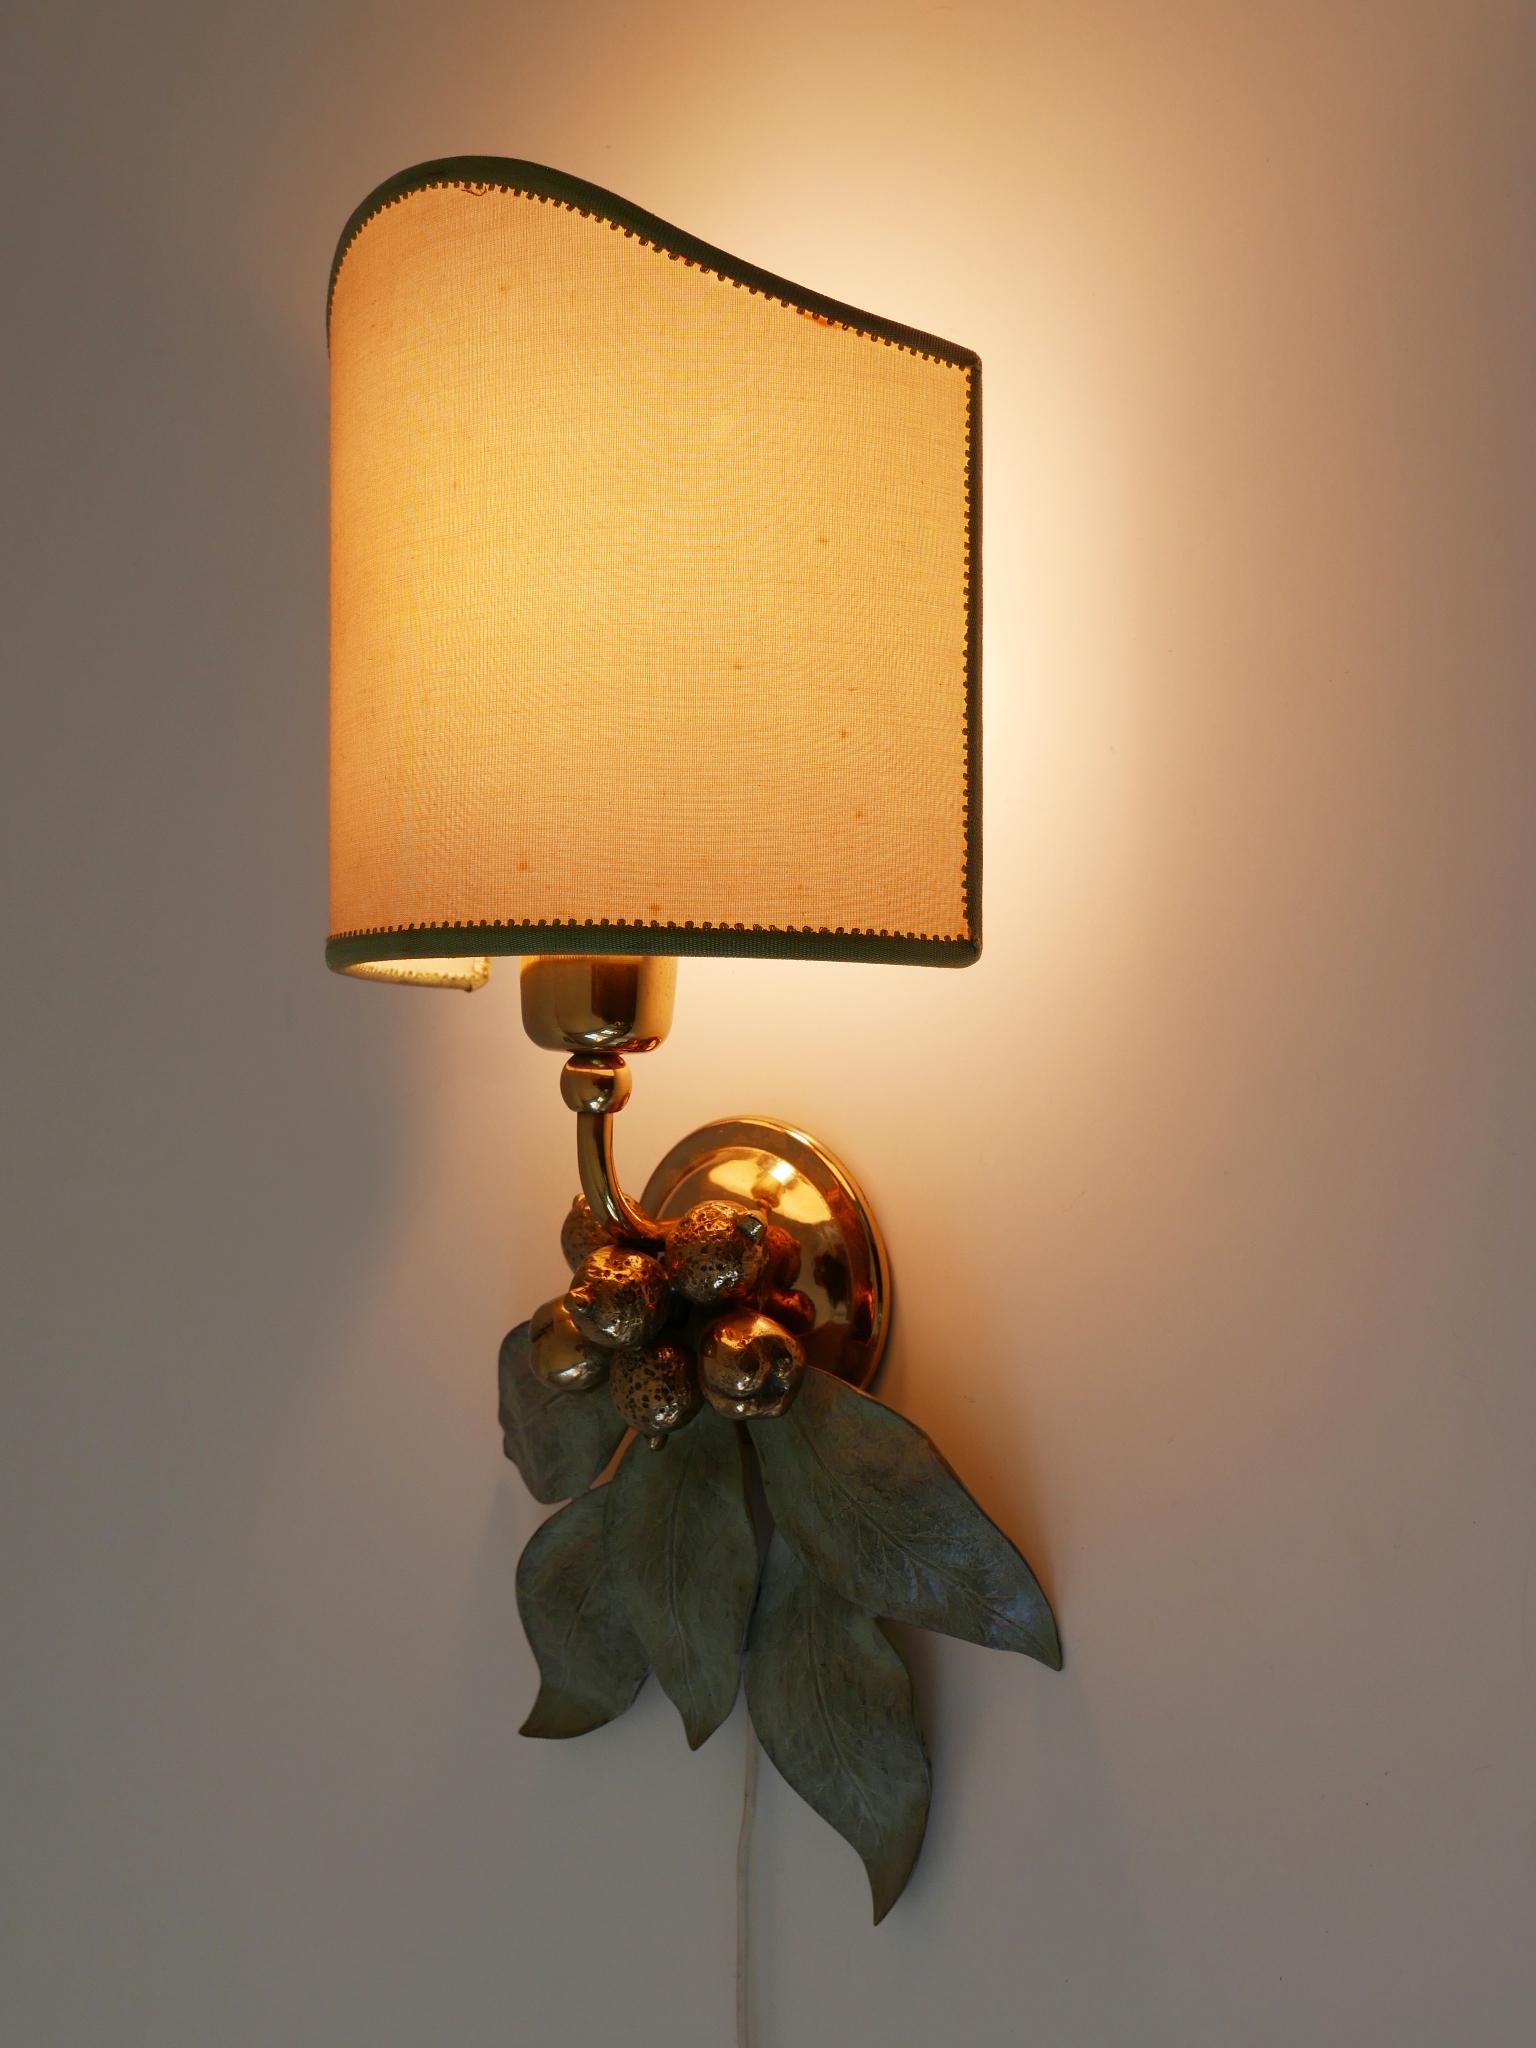 Rare and elegant Mid-Century Modern floral sconce. Designed and manufactured probably in Germany, 1970s.

Executed in bronze patinated and partly polished brass, the sconce comes with 1 x E27 / E26 Edison screw fit bulb holder. It is wired and in